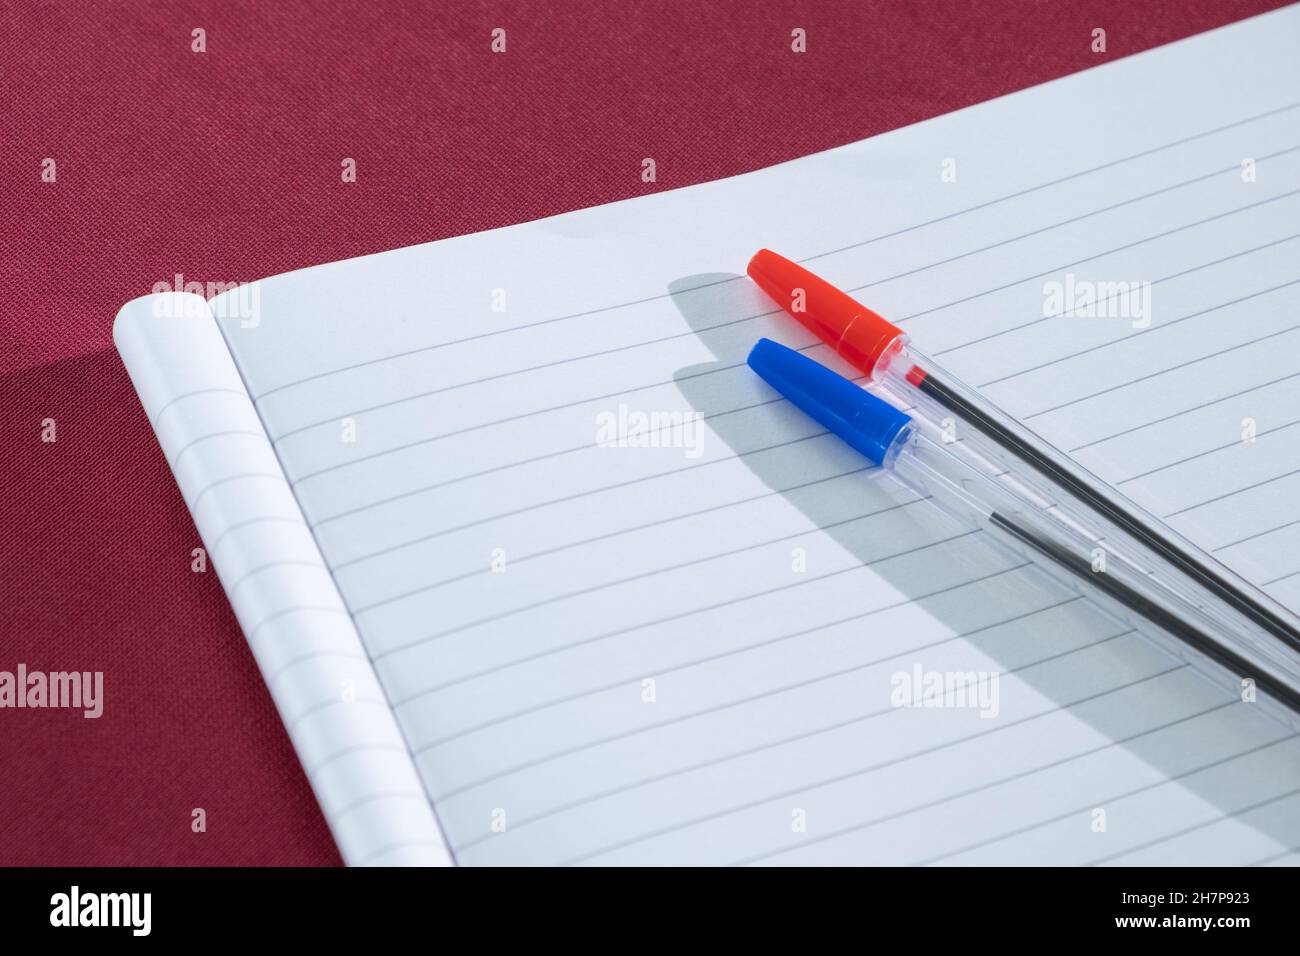 writing equipment blue and ren ballpoint pens placed on the lined paper Clean sheet of notebook for school notes Stock Photo